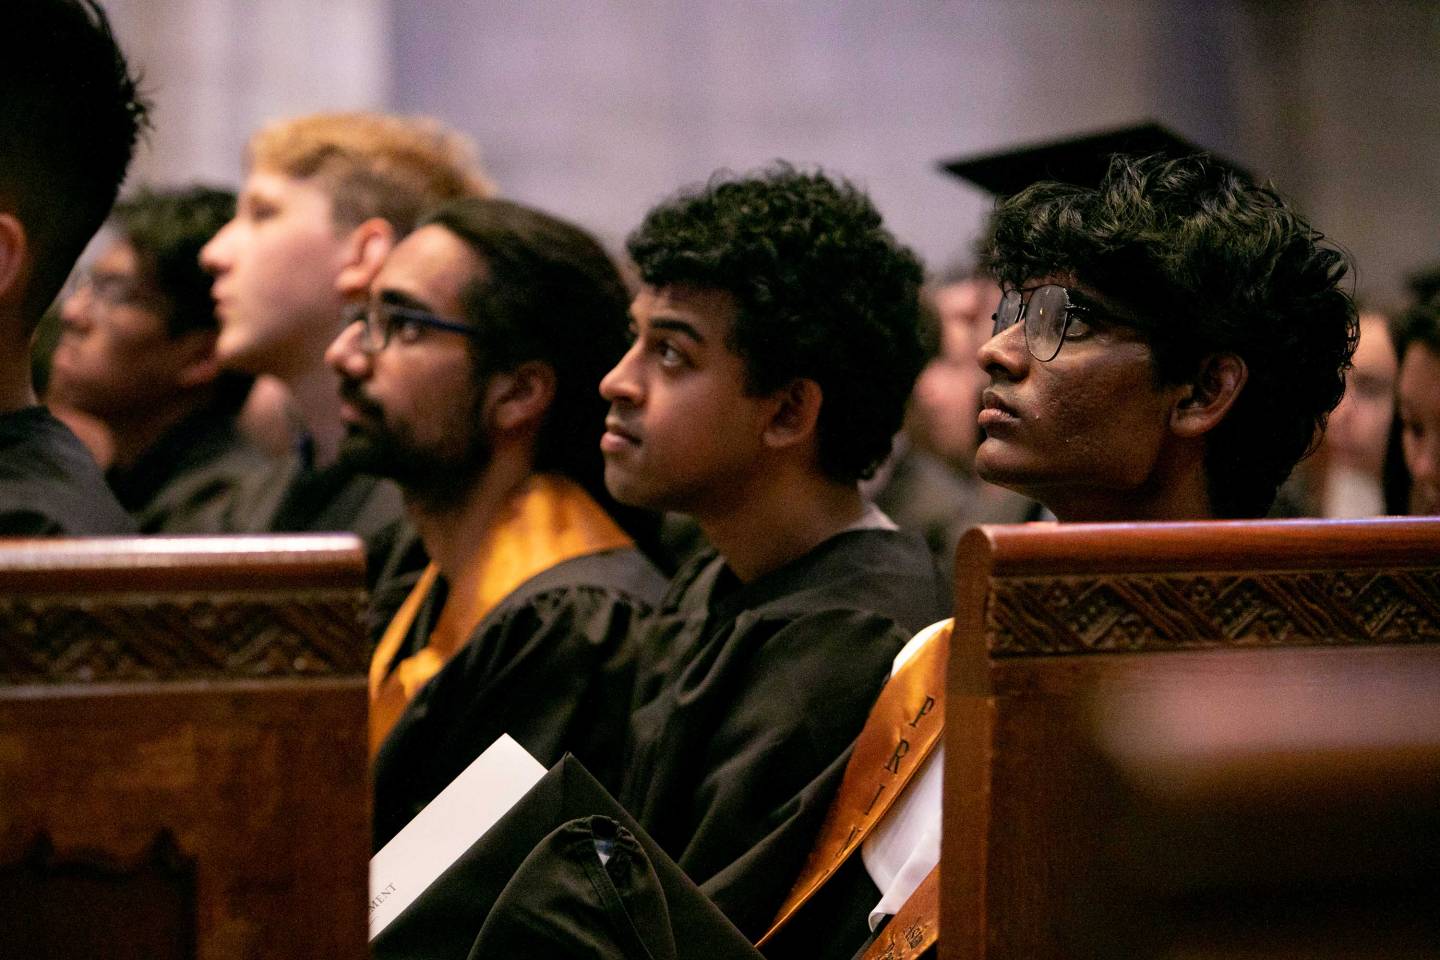 Students listen in the pews